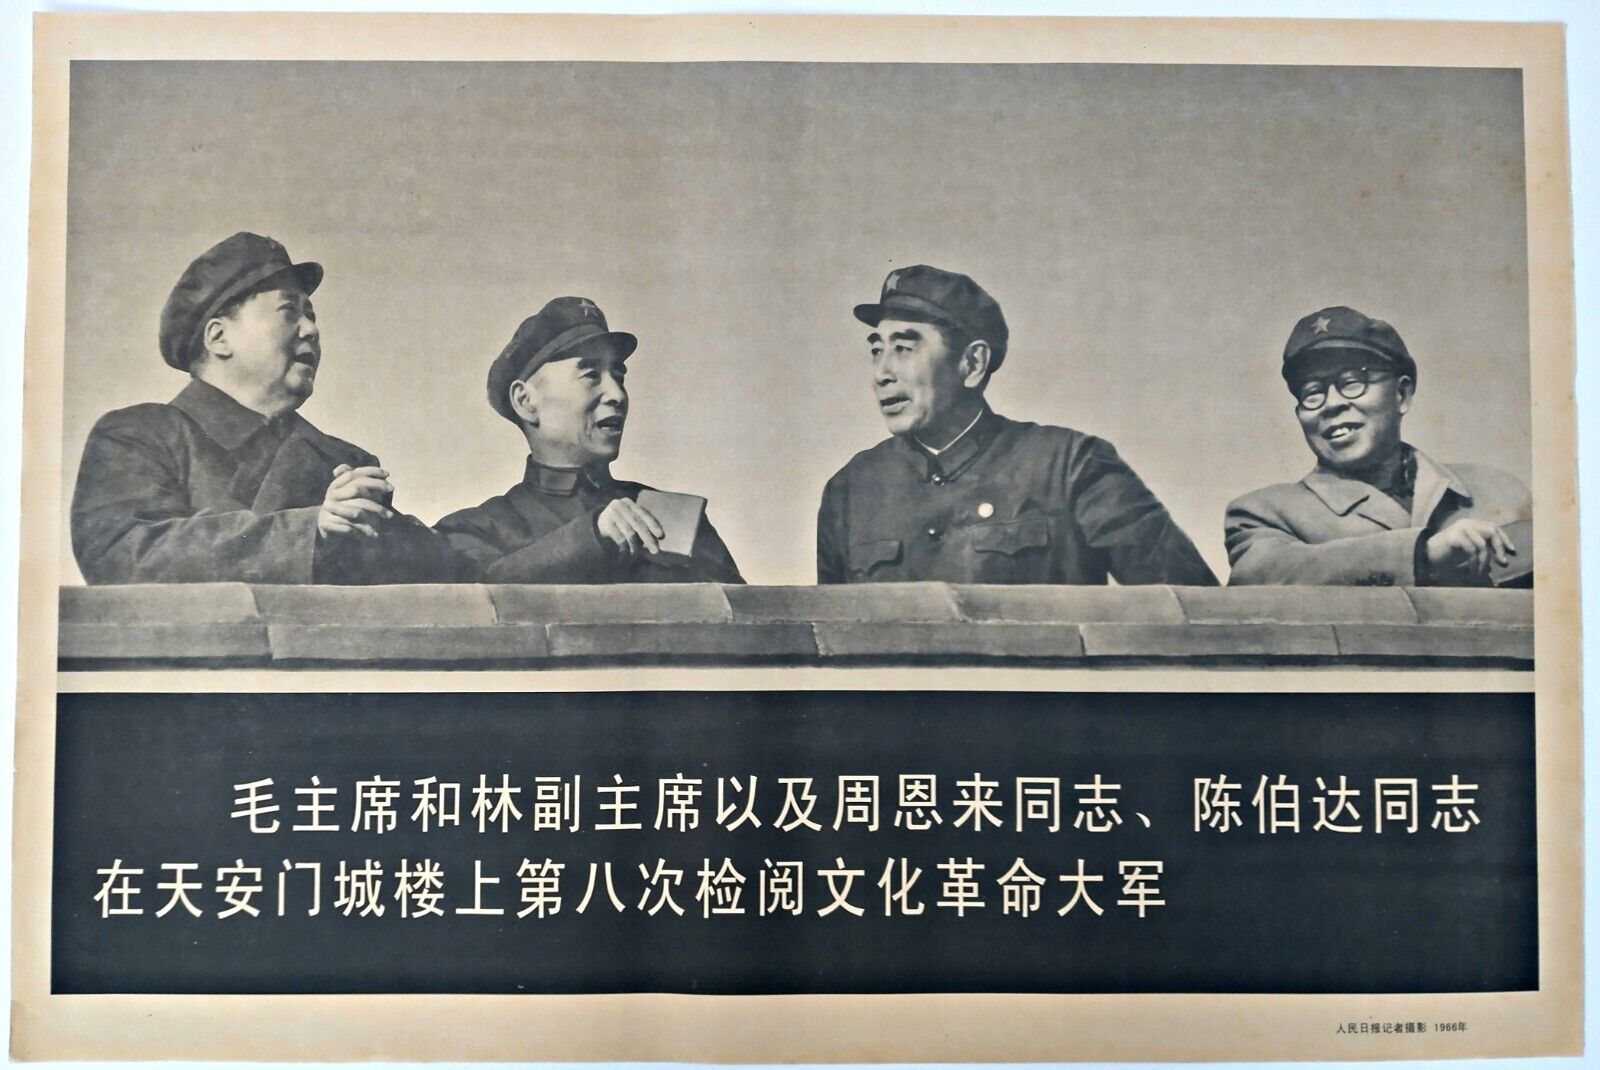 CHINESE CULTURAL REVOLUTION POSTER 60's VINTAGE - US SELLER - Mao, Lin, Zhou